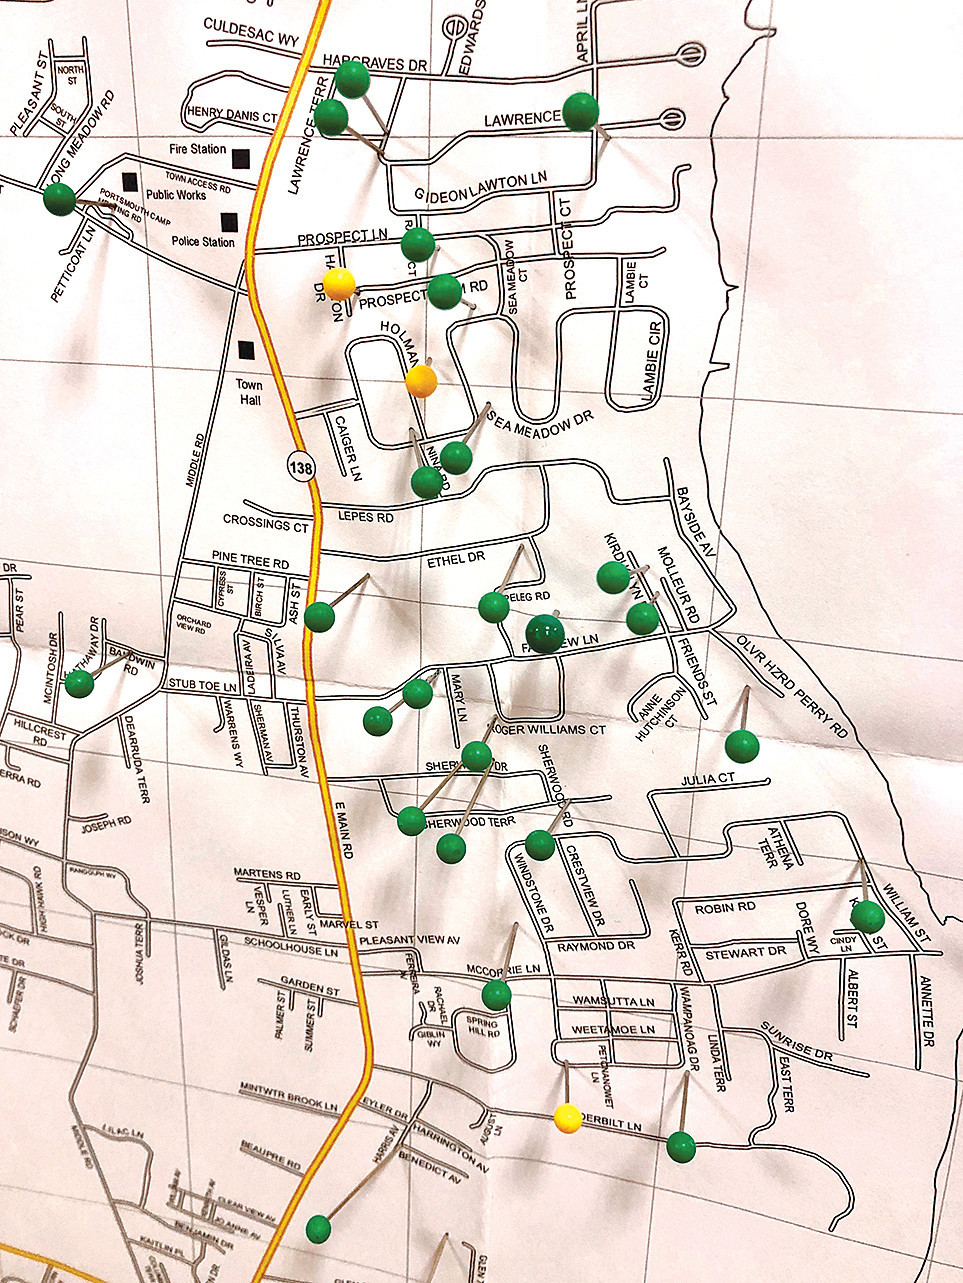 On this Portsmouth street map set up at Town Hall Tuesday, green pins mark several neighborhoods where police have received reports of coyote sightings. The yellow pins represent sightings added by residents who attended the meeting. There were also white pins to mark sightings of injured coyotes, and red pins that represented reports of confrontations between coyotes and dogs.